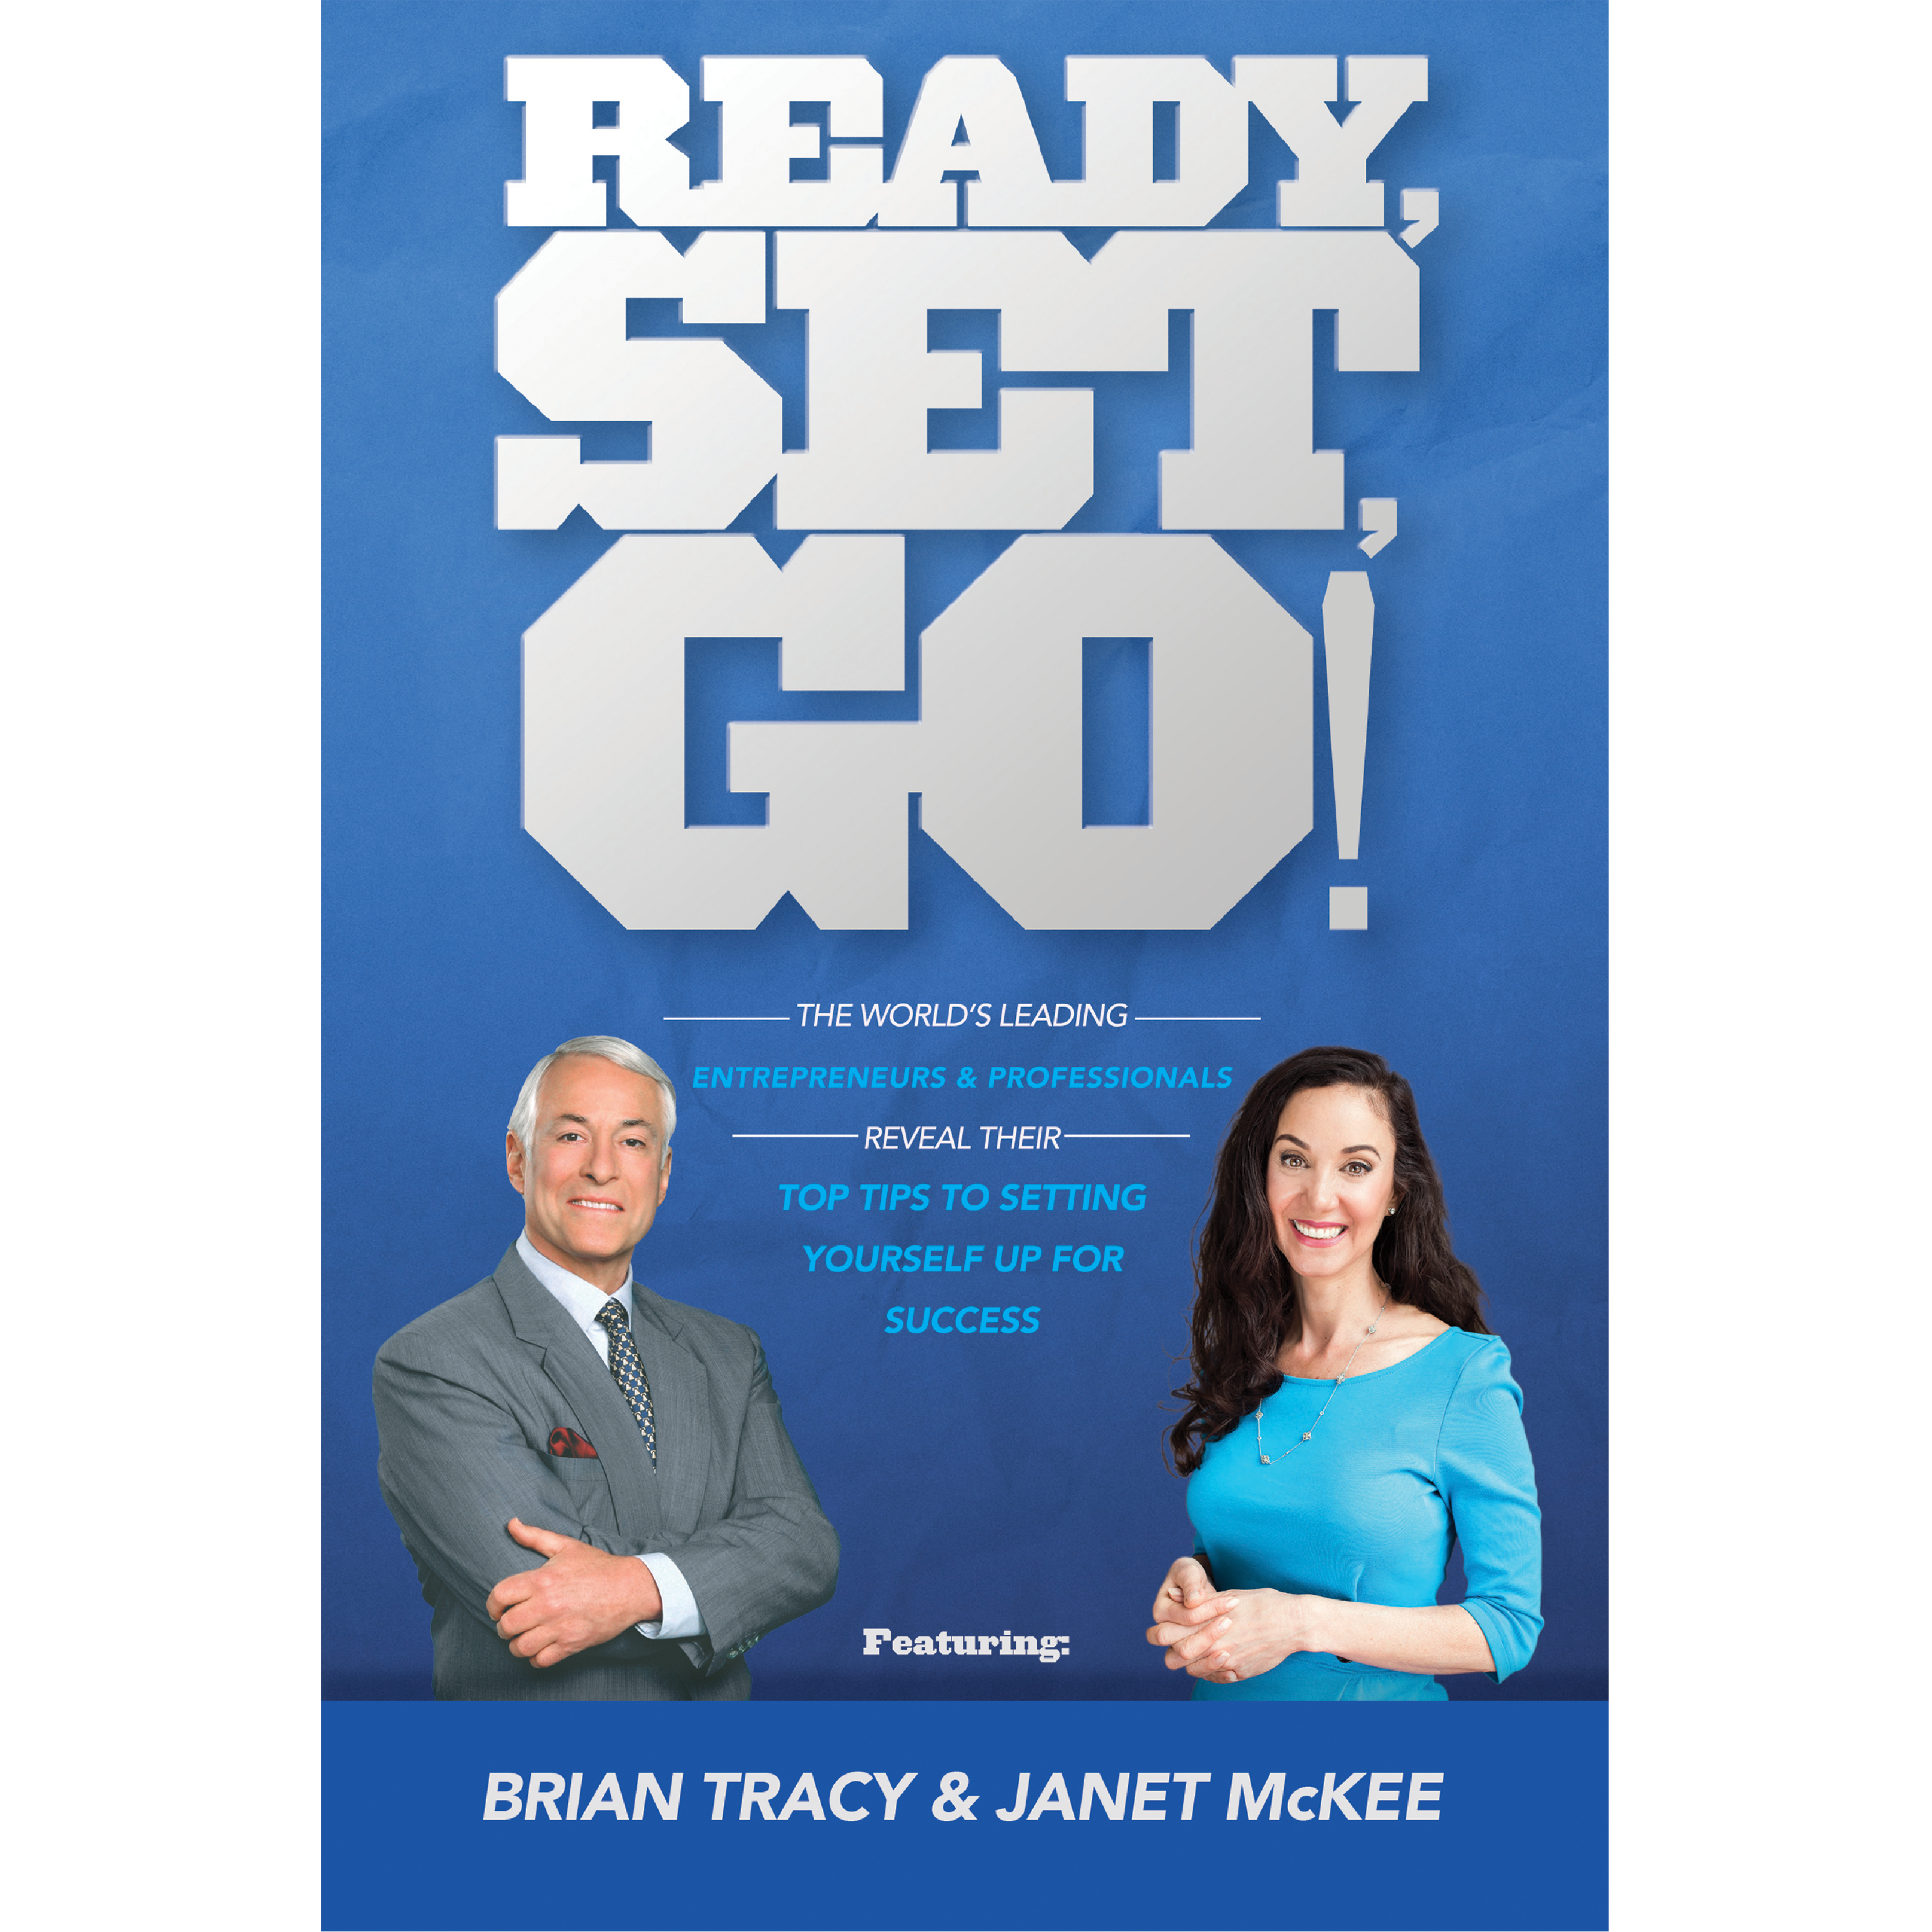 For Immediate Release – Janet is Co-author of a Best Selling Book, “Ready, Set, Go”